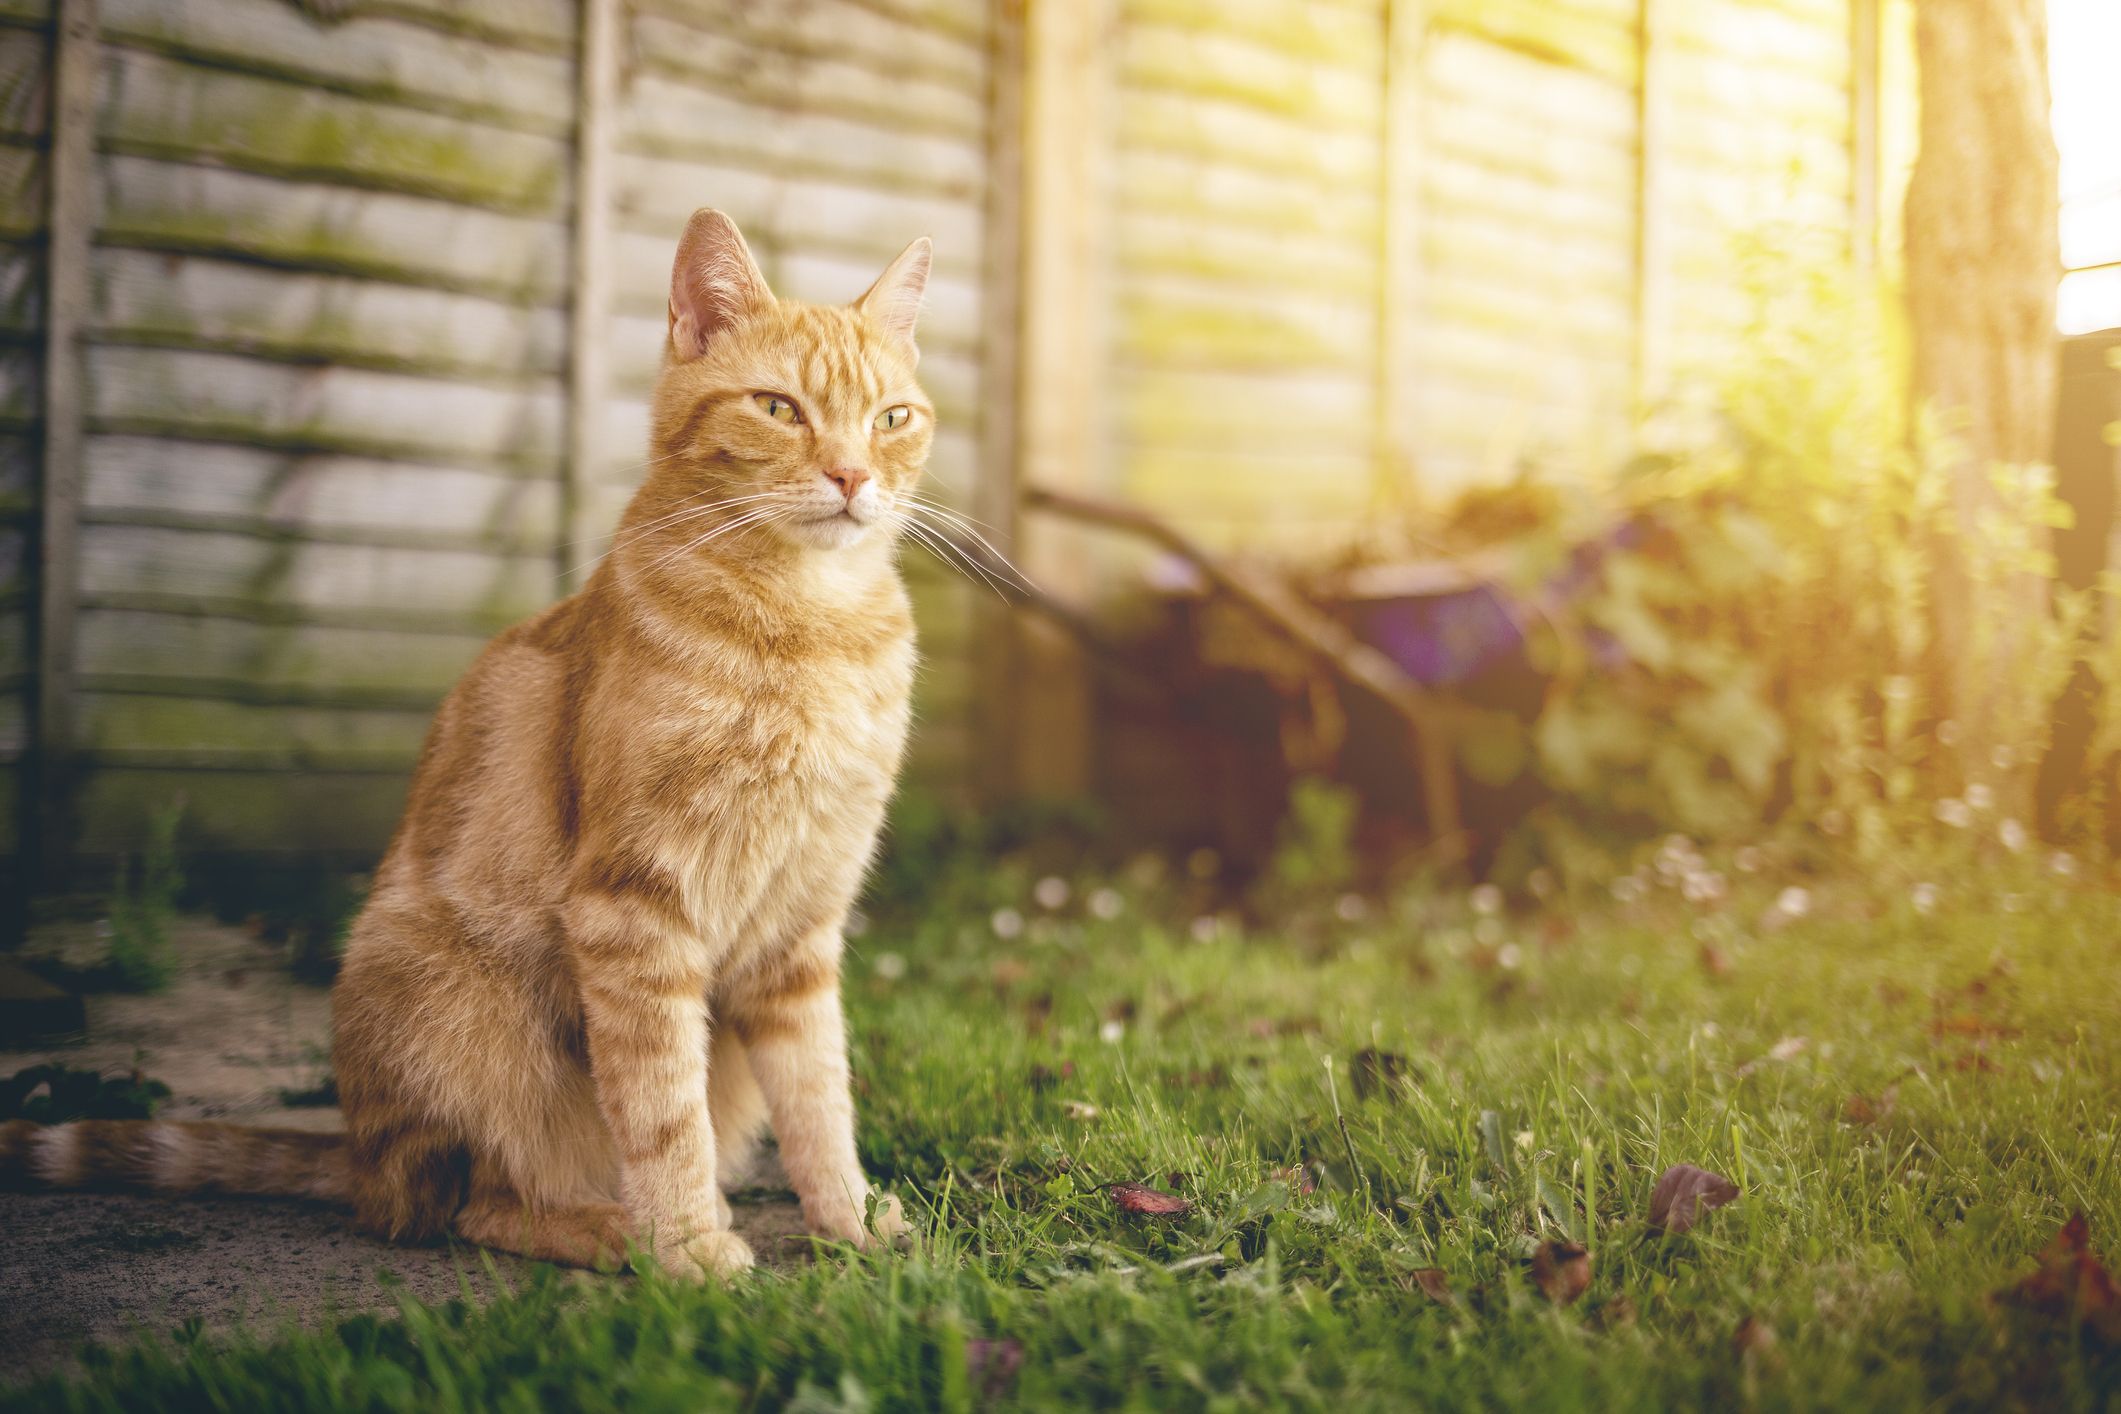 How To Keep Cats Out Of Garden 9 Ways To Deter Cats From Garden